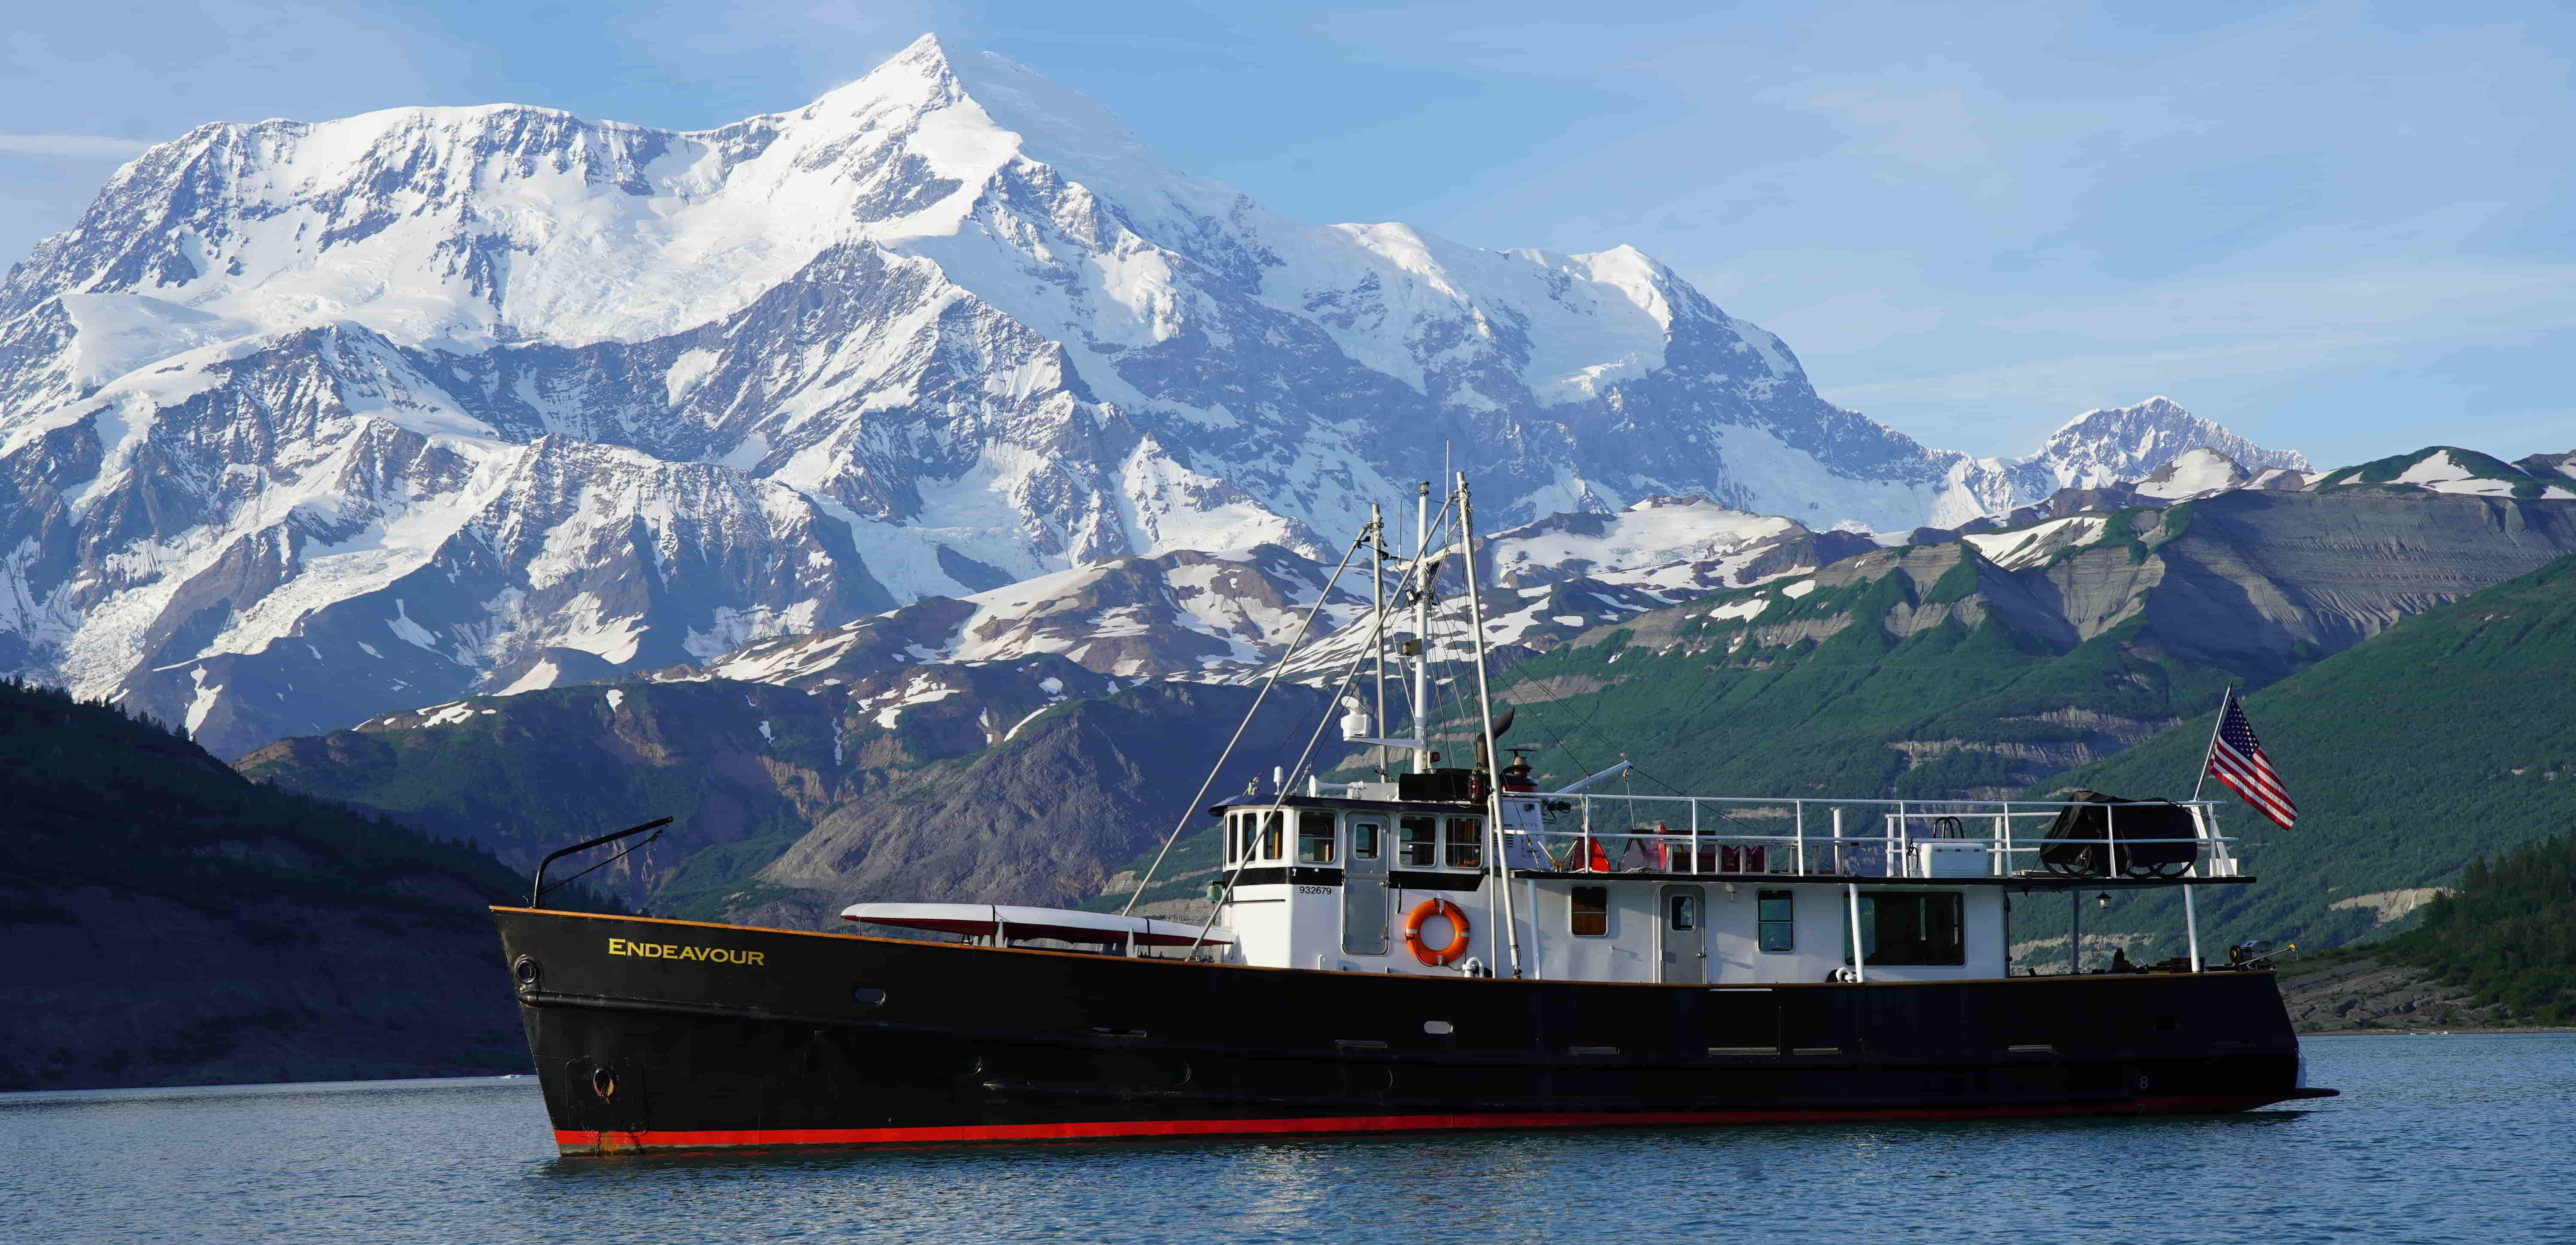 The Endeavour in Icy Bay with Mt St Elias in the background